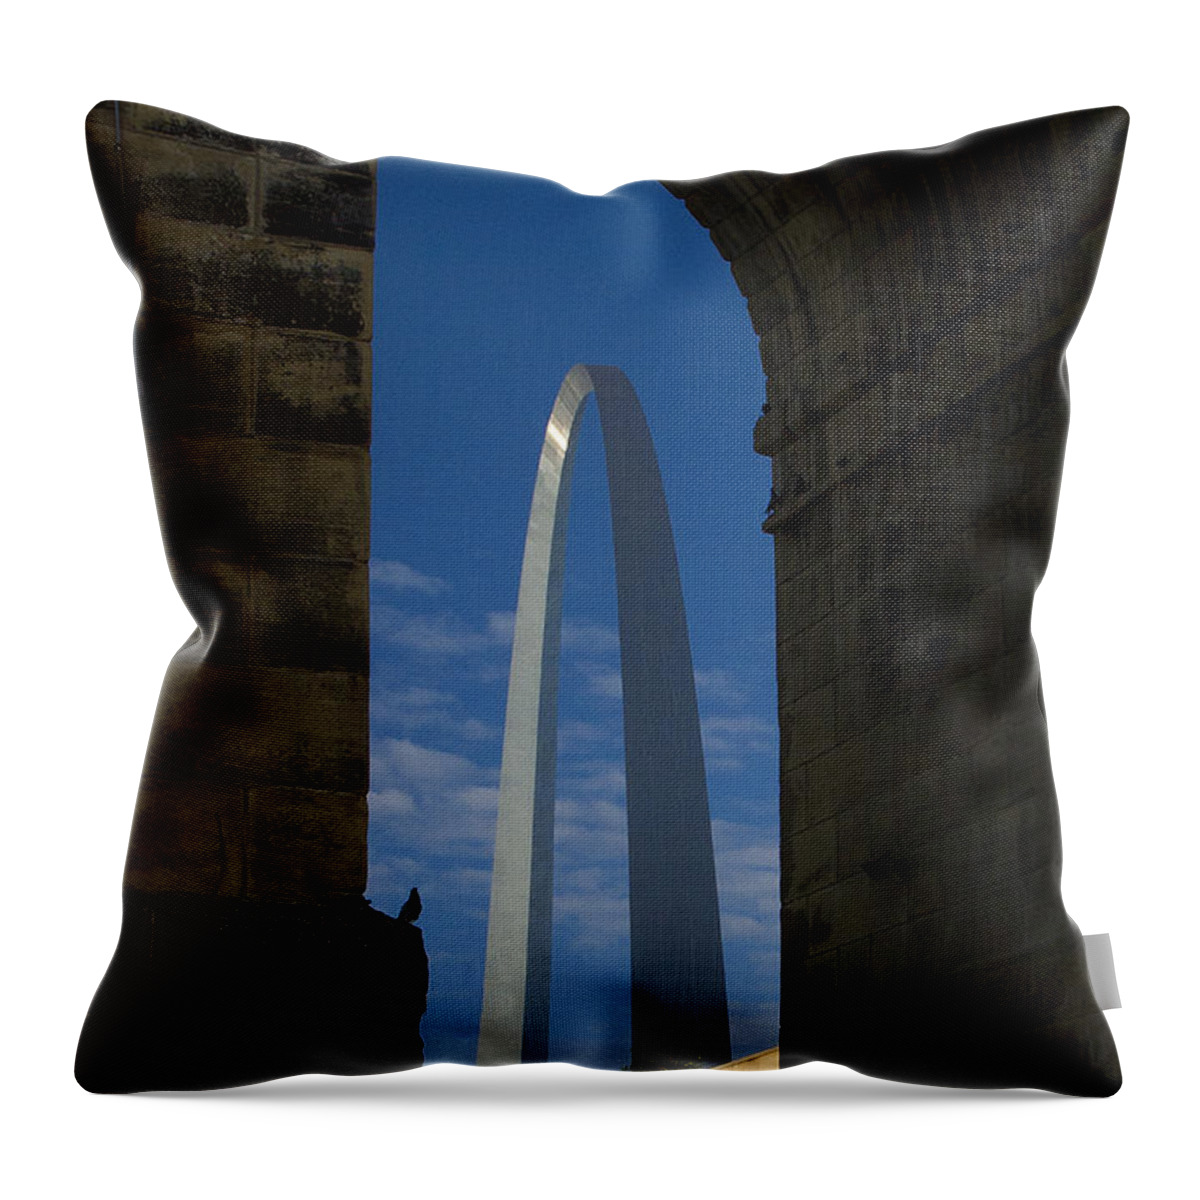 Eads Bridge Throw Pillow featuring the photograph The Guardian by Garry McMichael